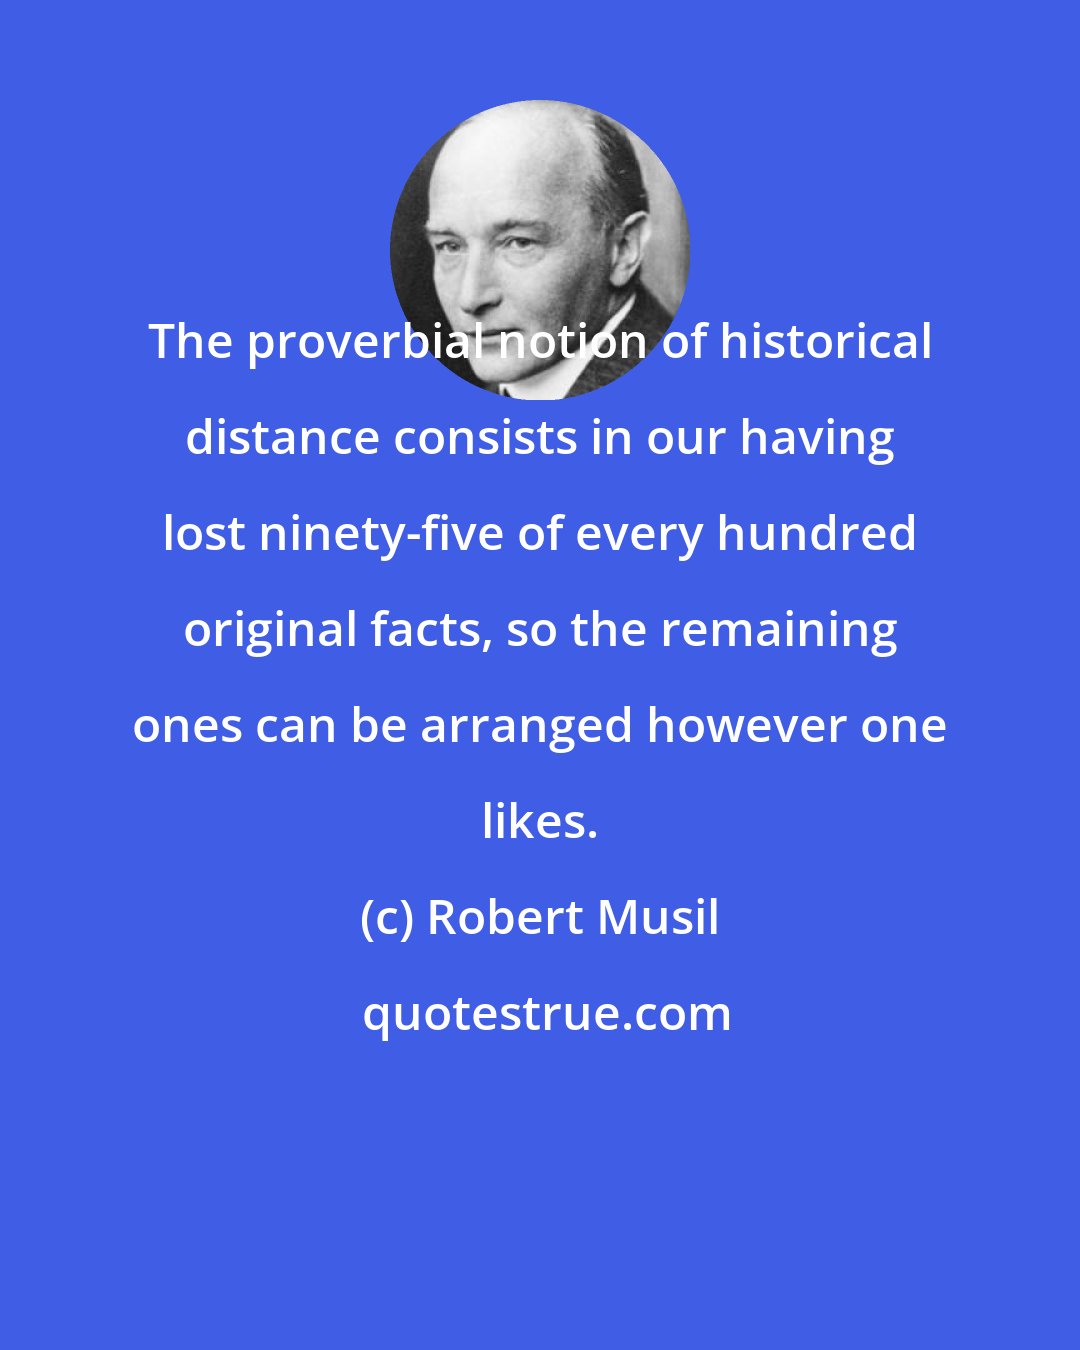 Robert Musil: The proverbial notion of historical distance consists in our having lost ninety-five of every hundred original facts, so the remaining ones can be arranged however one likes.